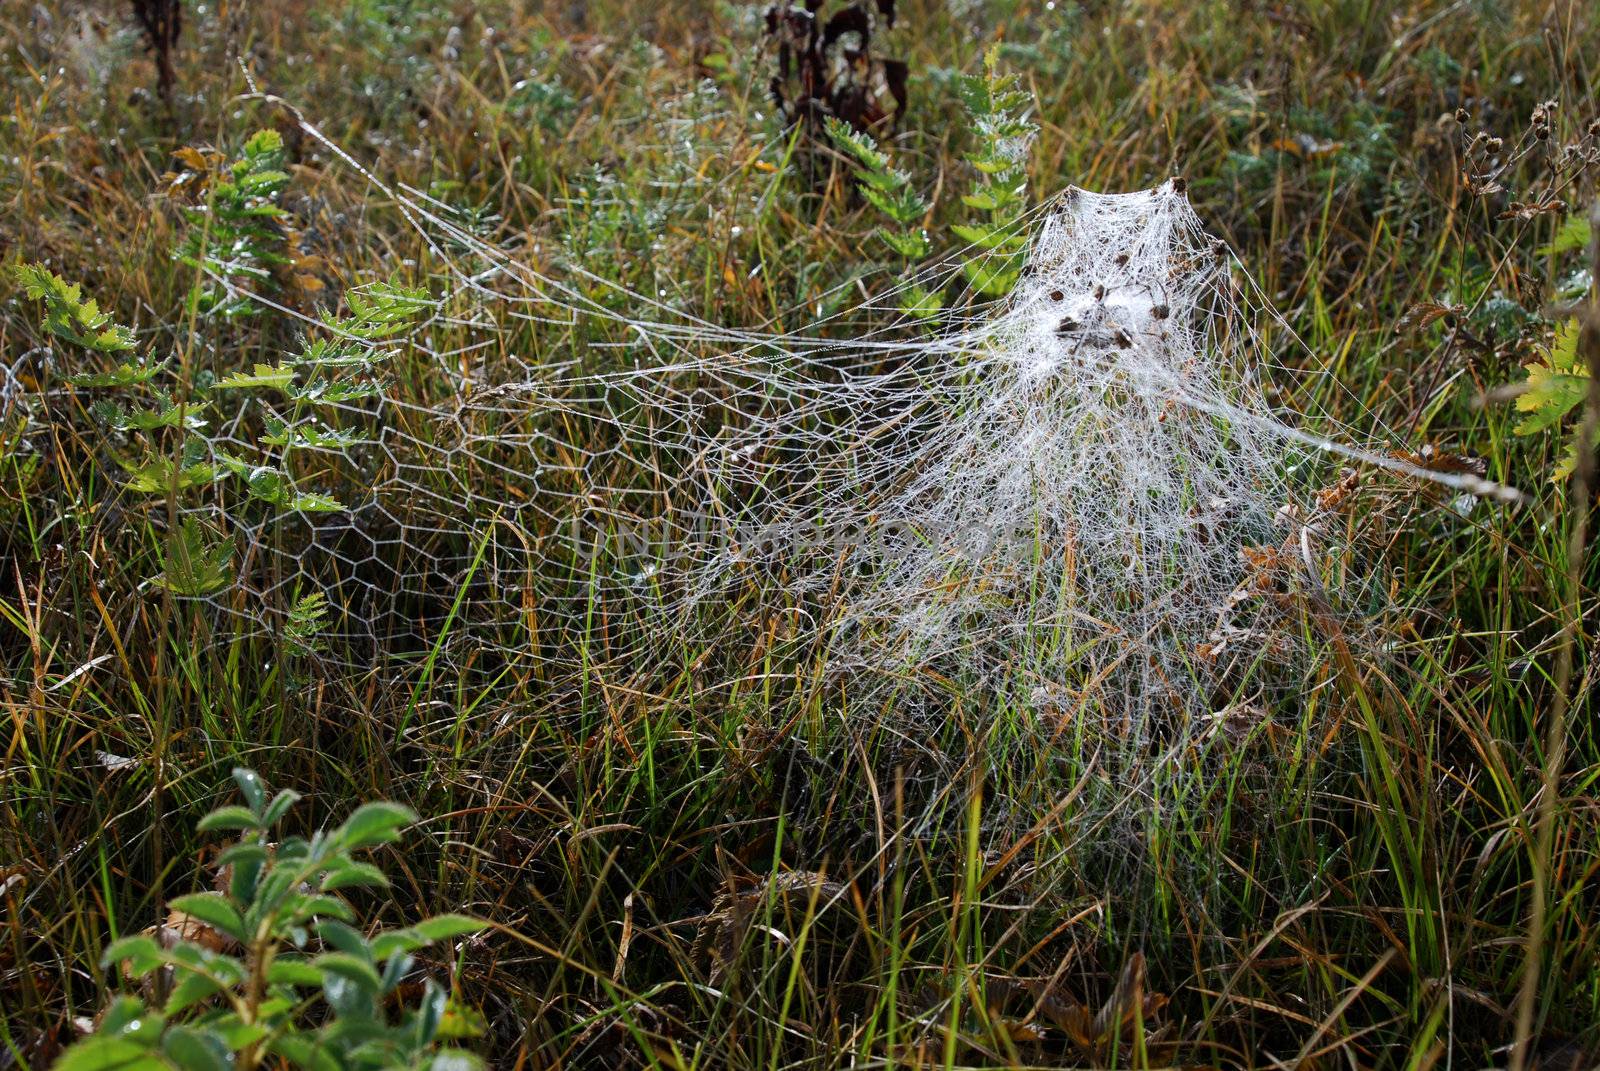 spiderweb with drops on the meadow in early morning